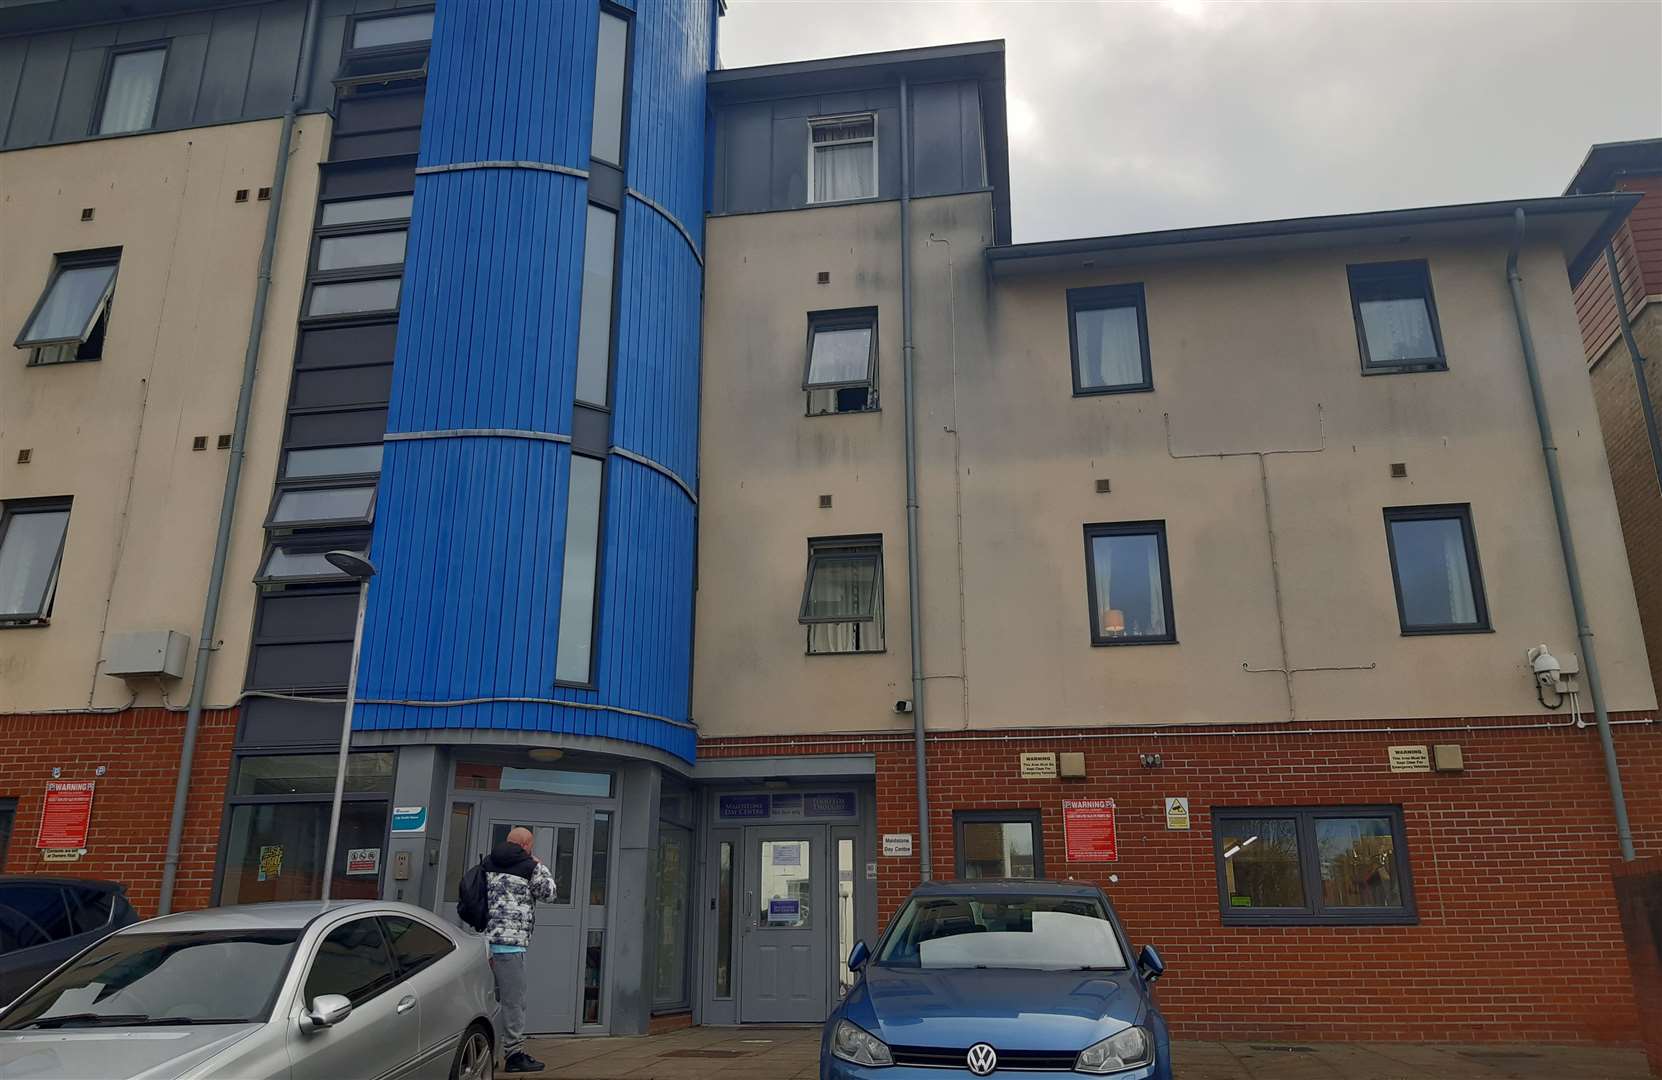 Maidstone Homeless Care has a day centre in Knightrider Street, Maidstone